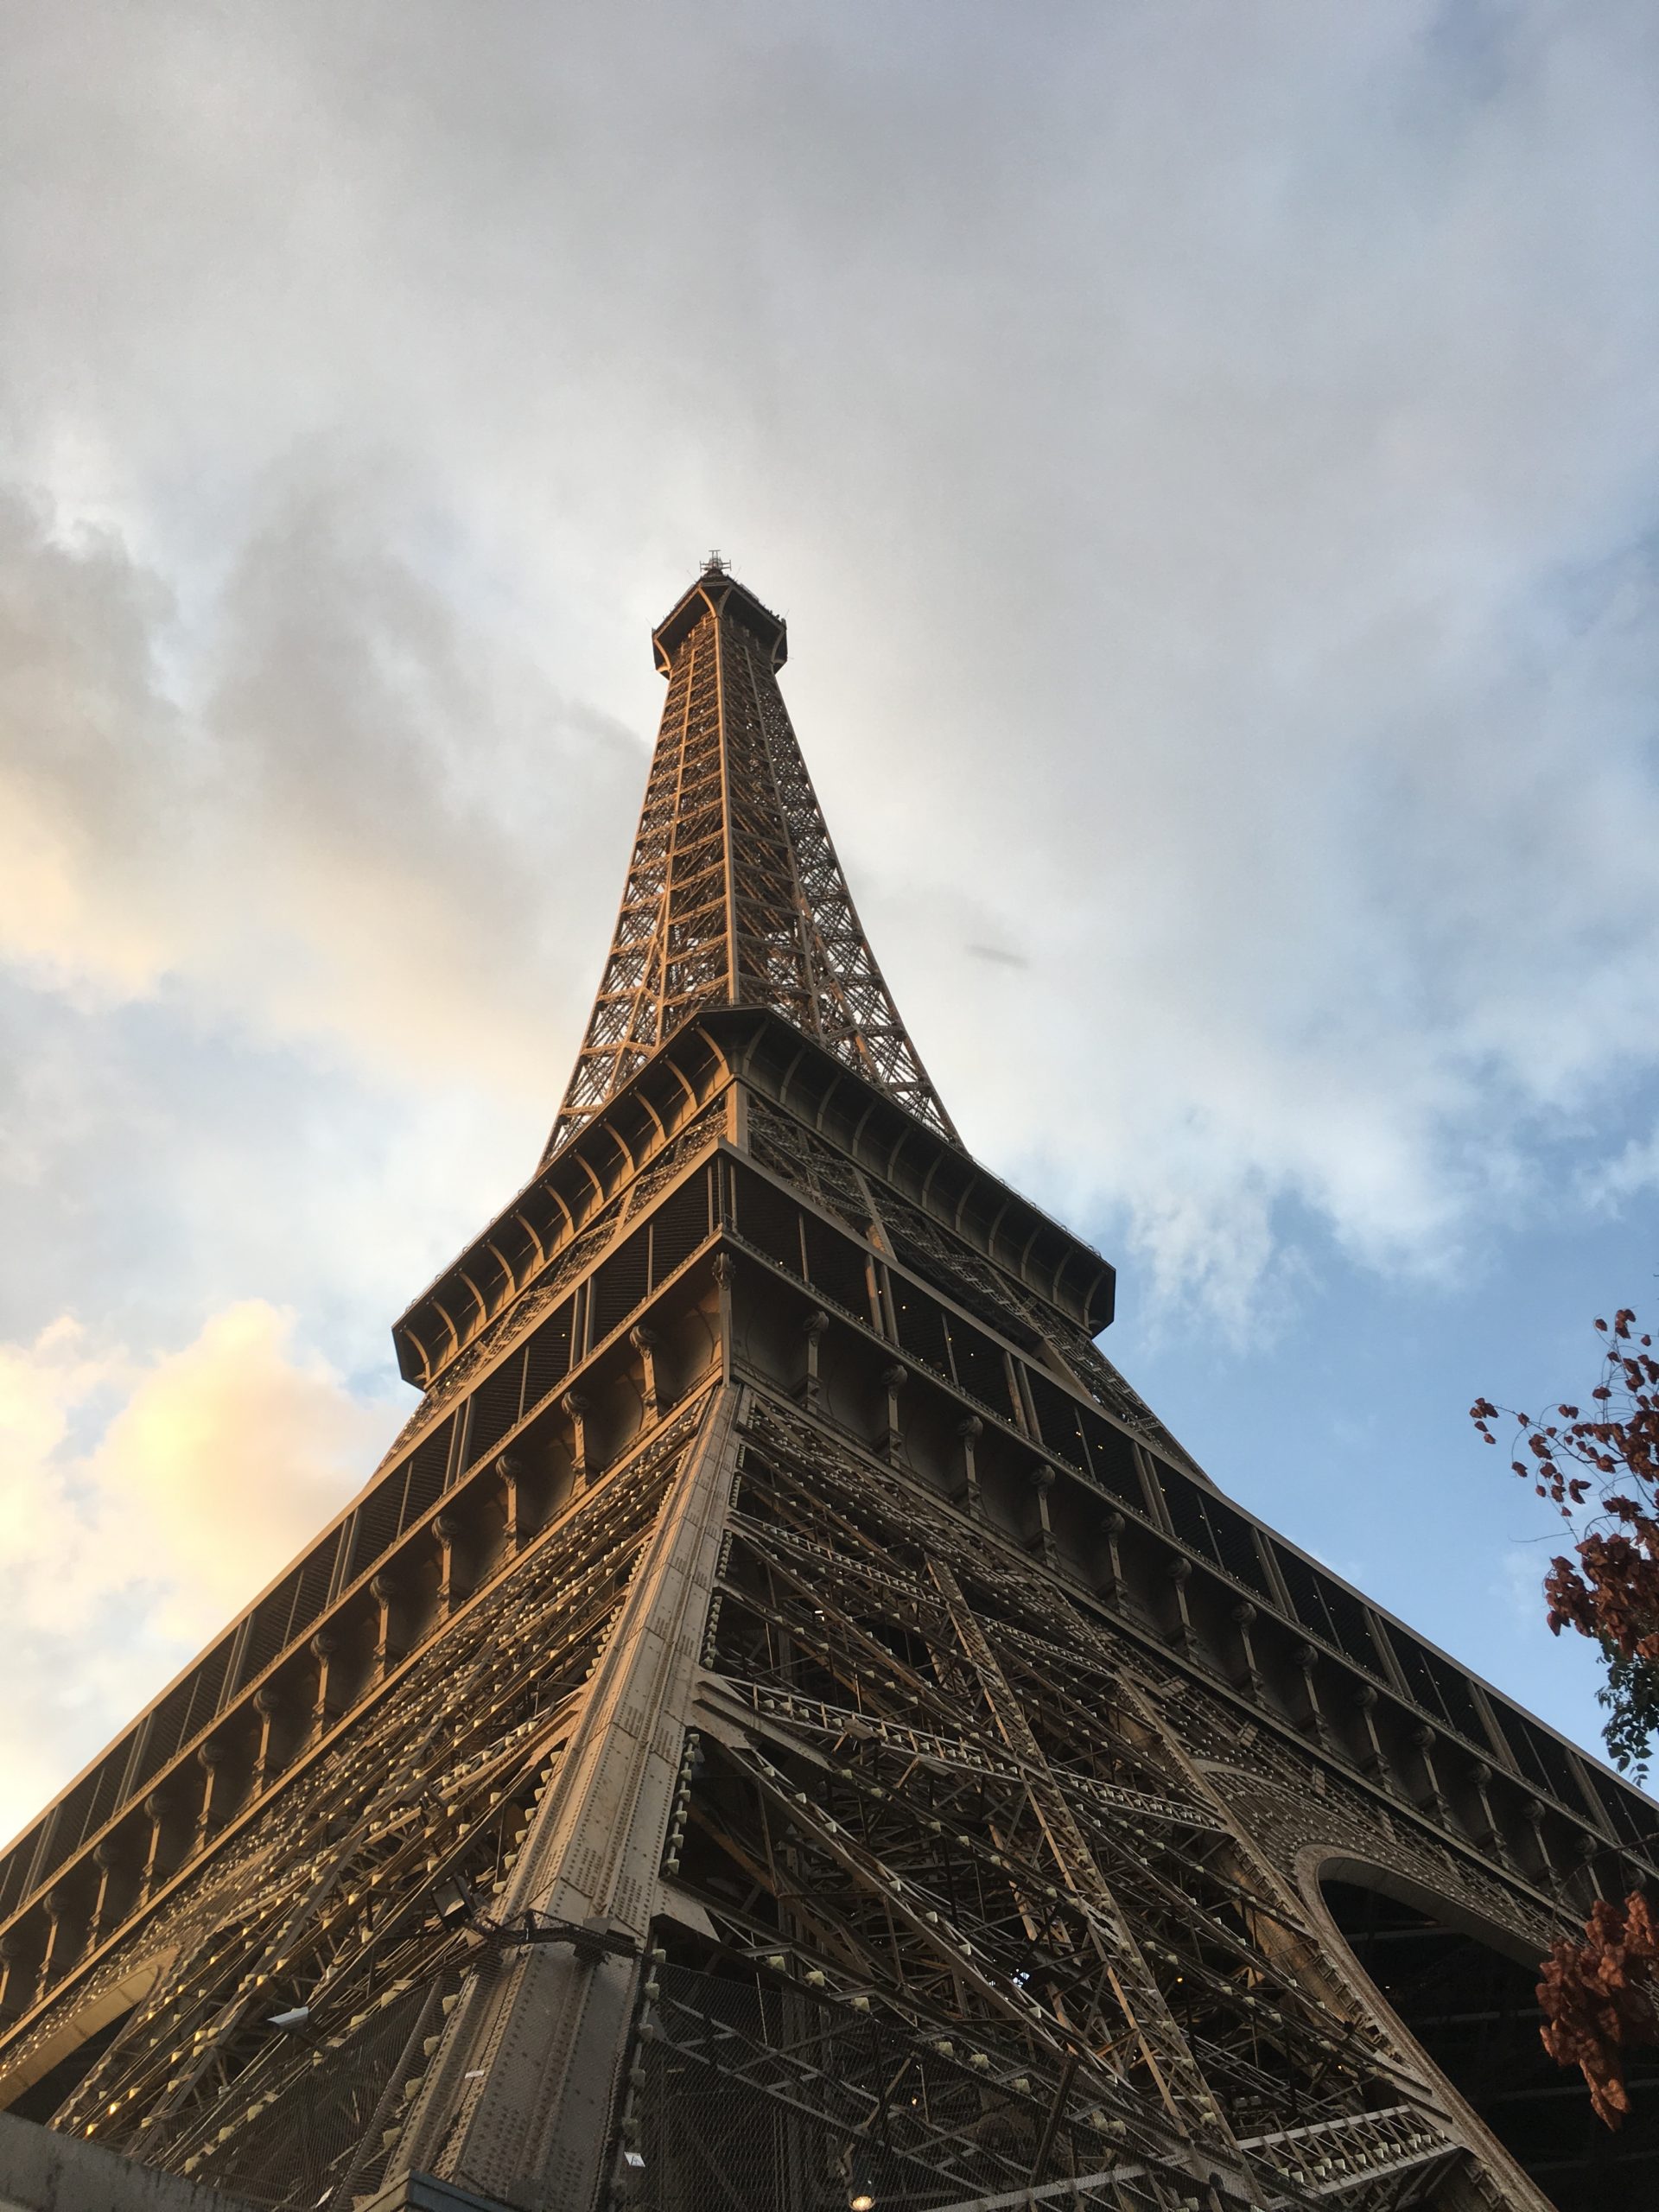 PARIS – The City of Lights and Love!